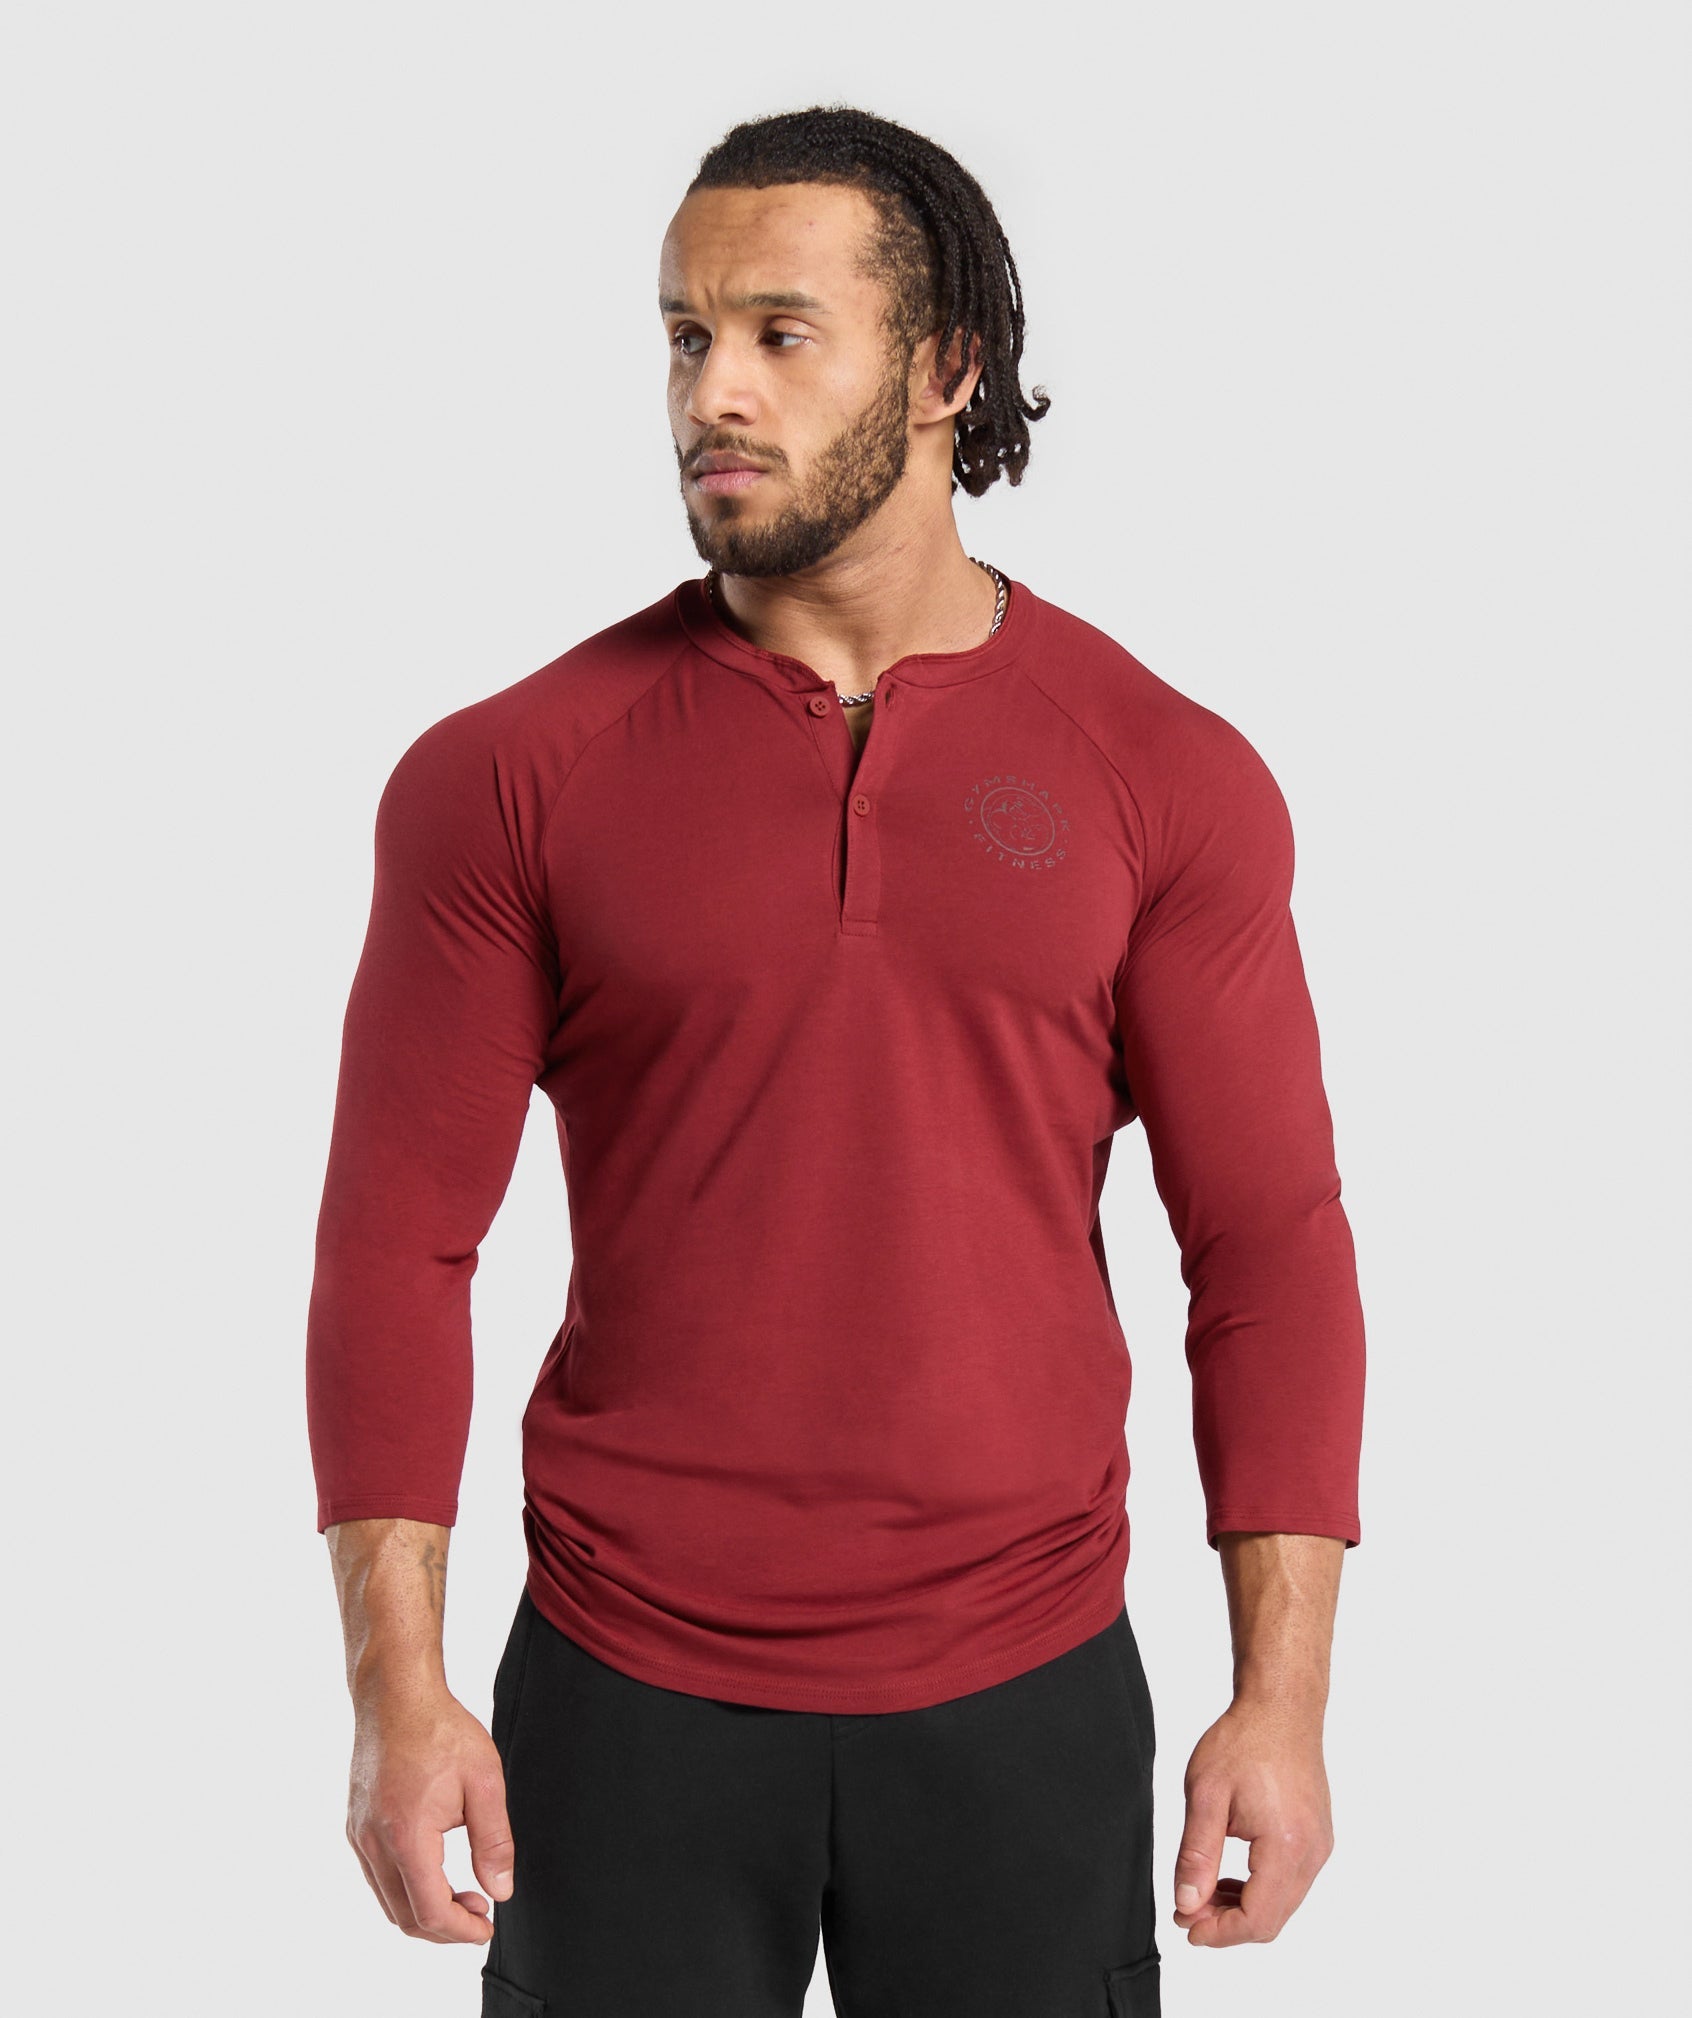 Legacy Henley in Washed Red is out of stock